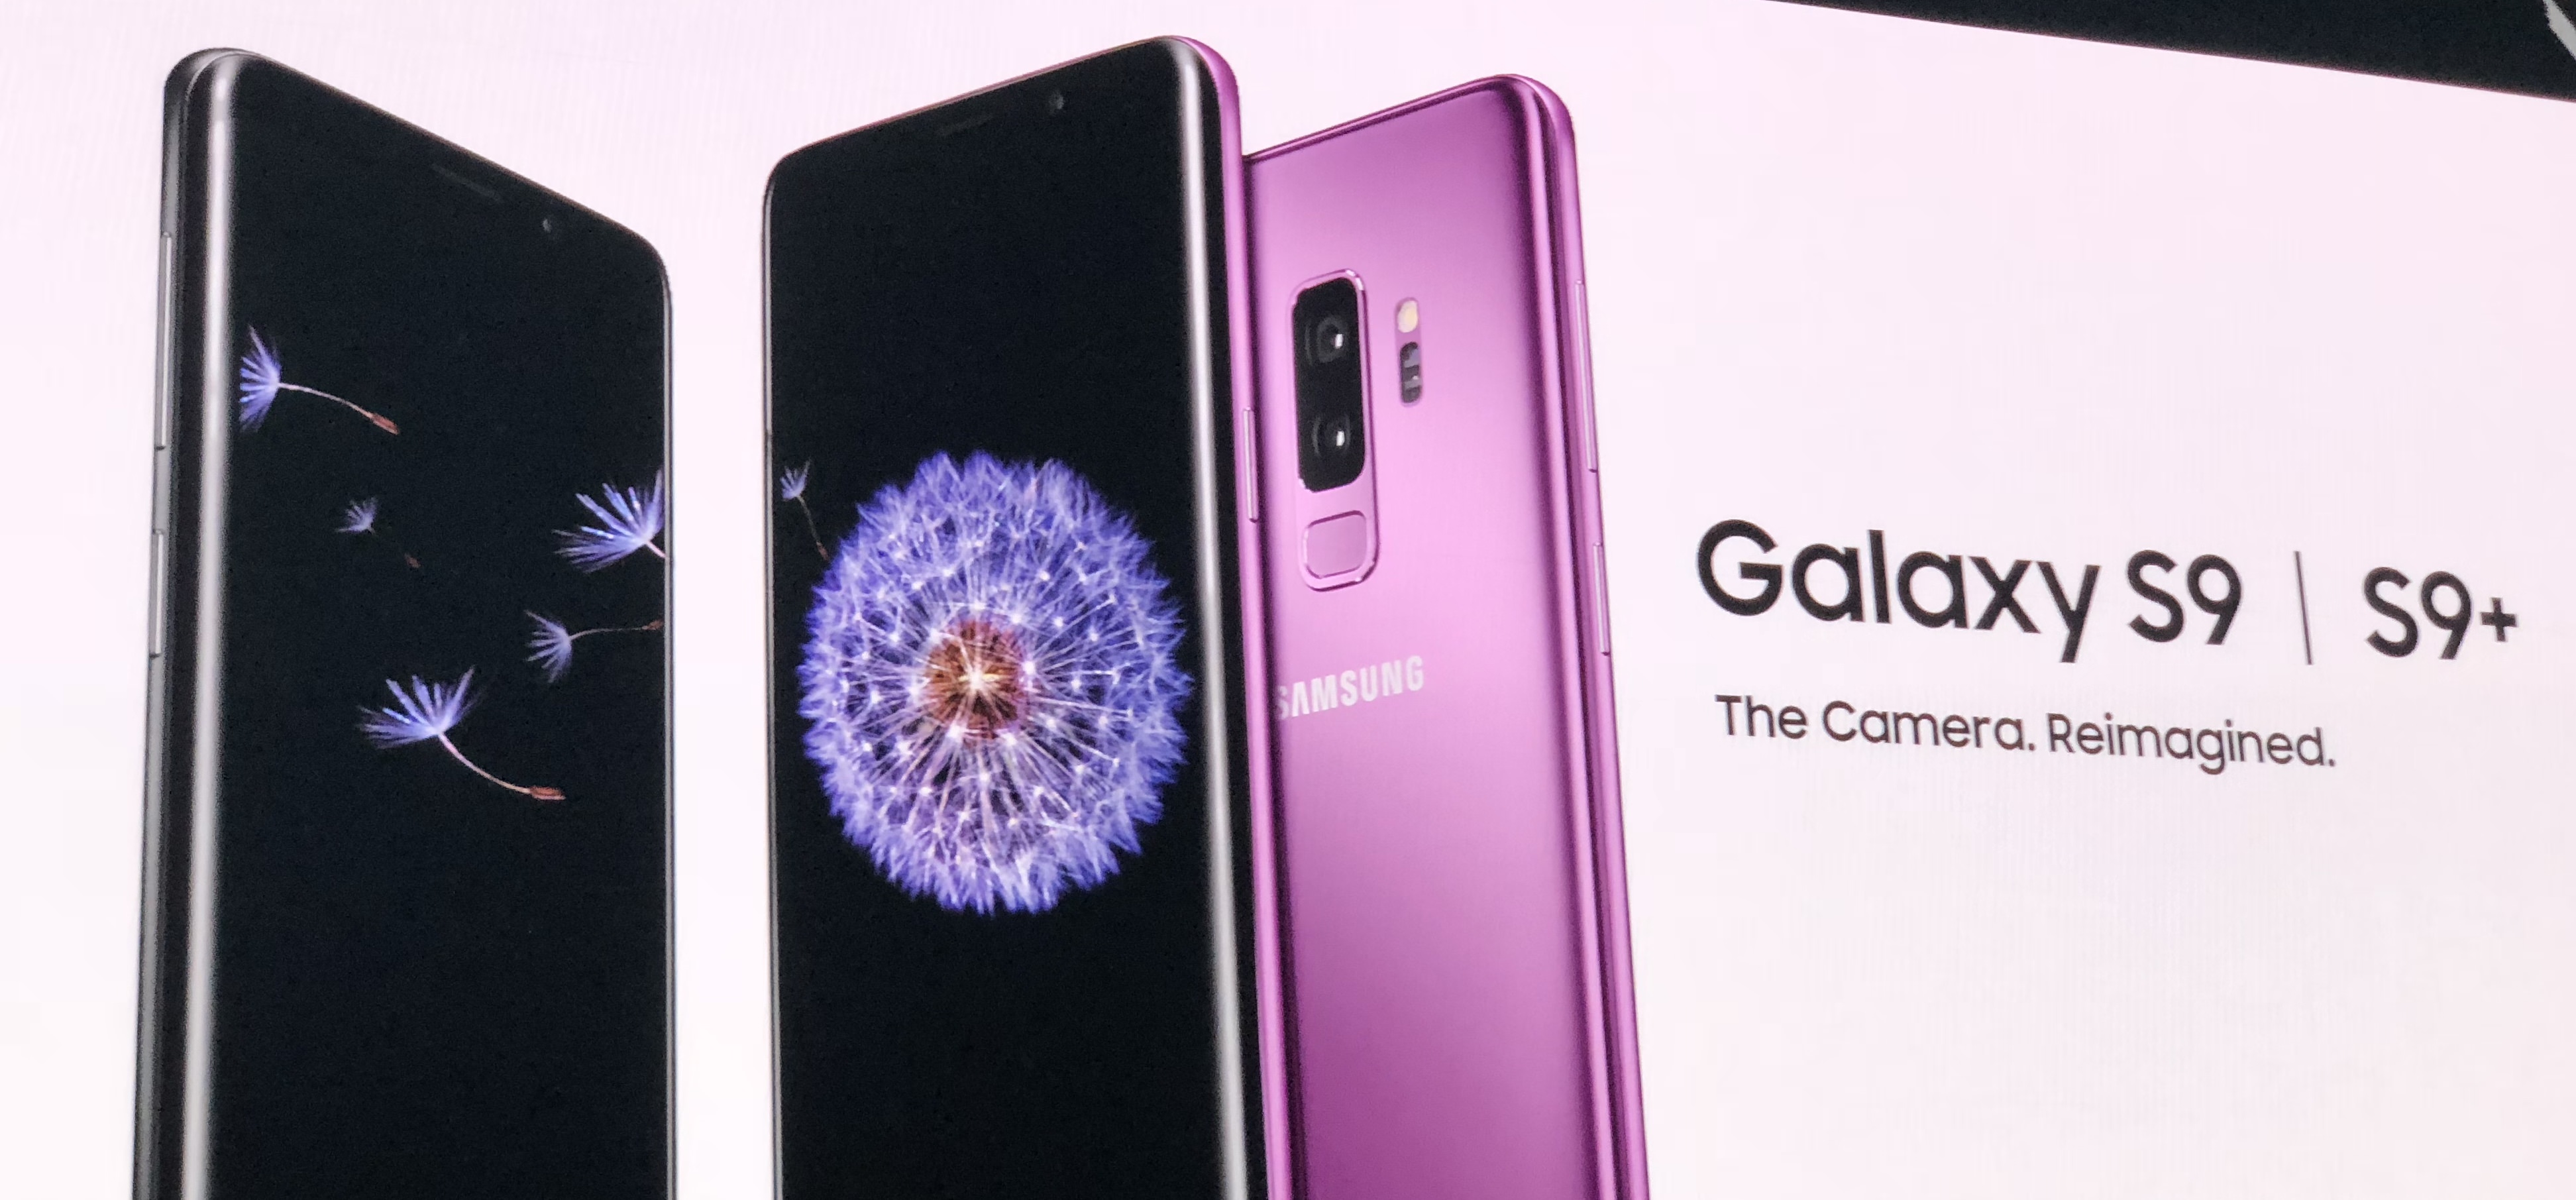 Samsung Galaxy S9/S9+ are not the Perfect 10 but will not disappoint You